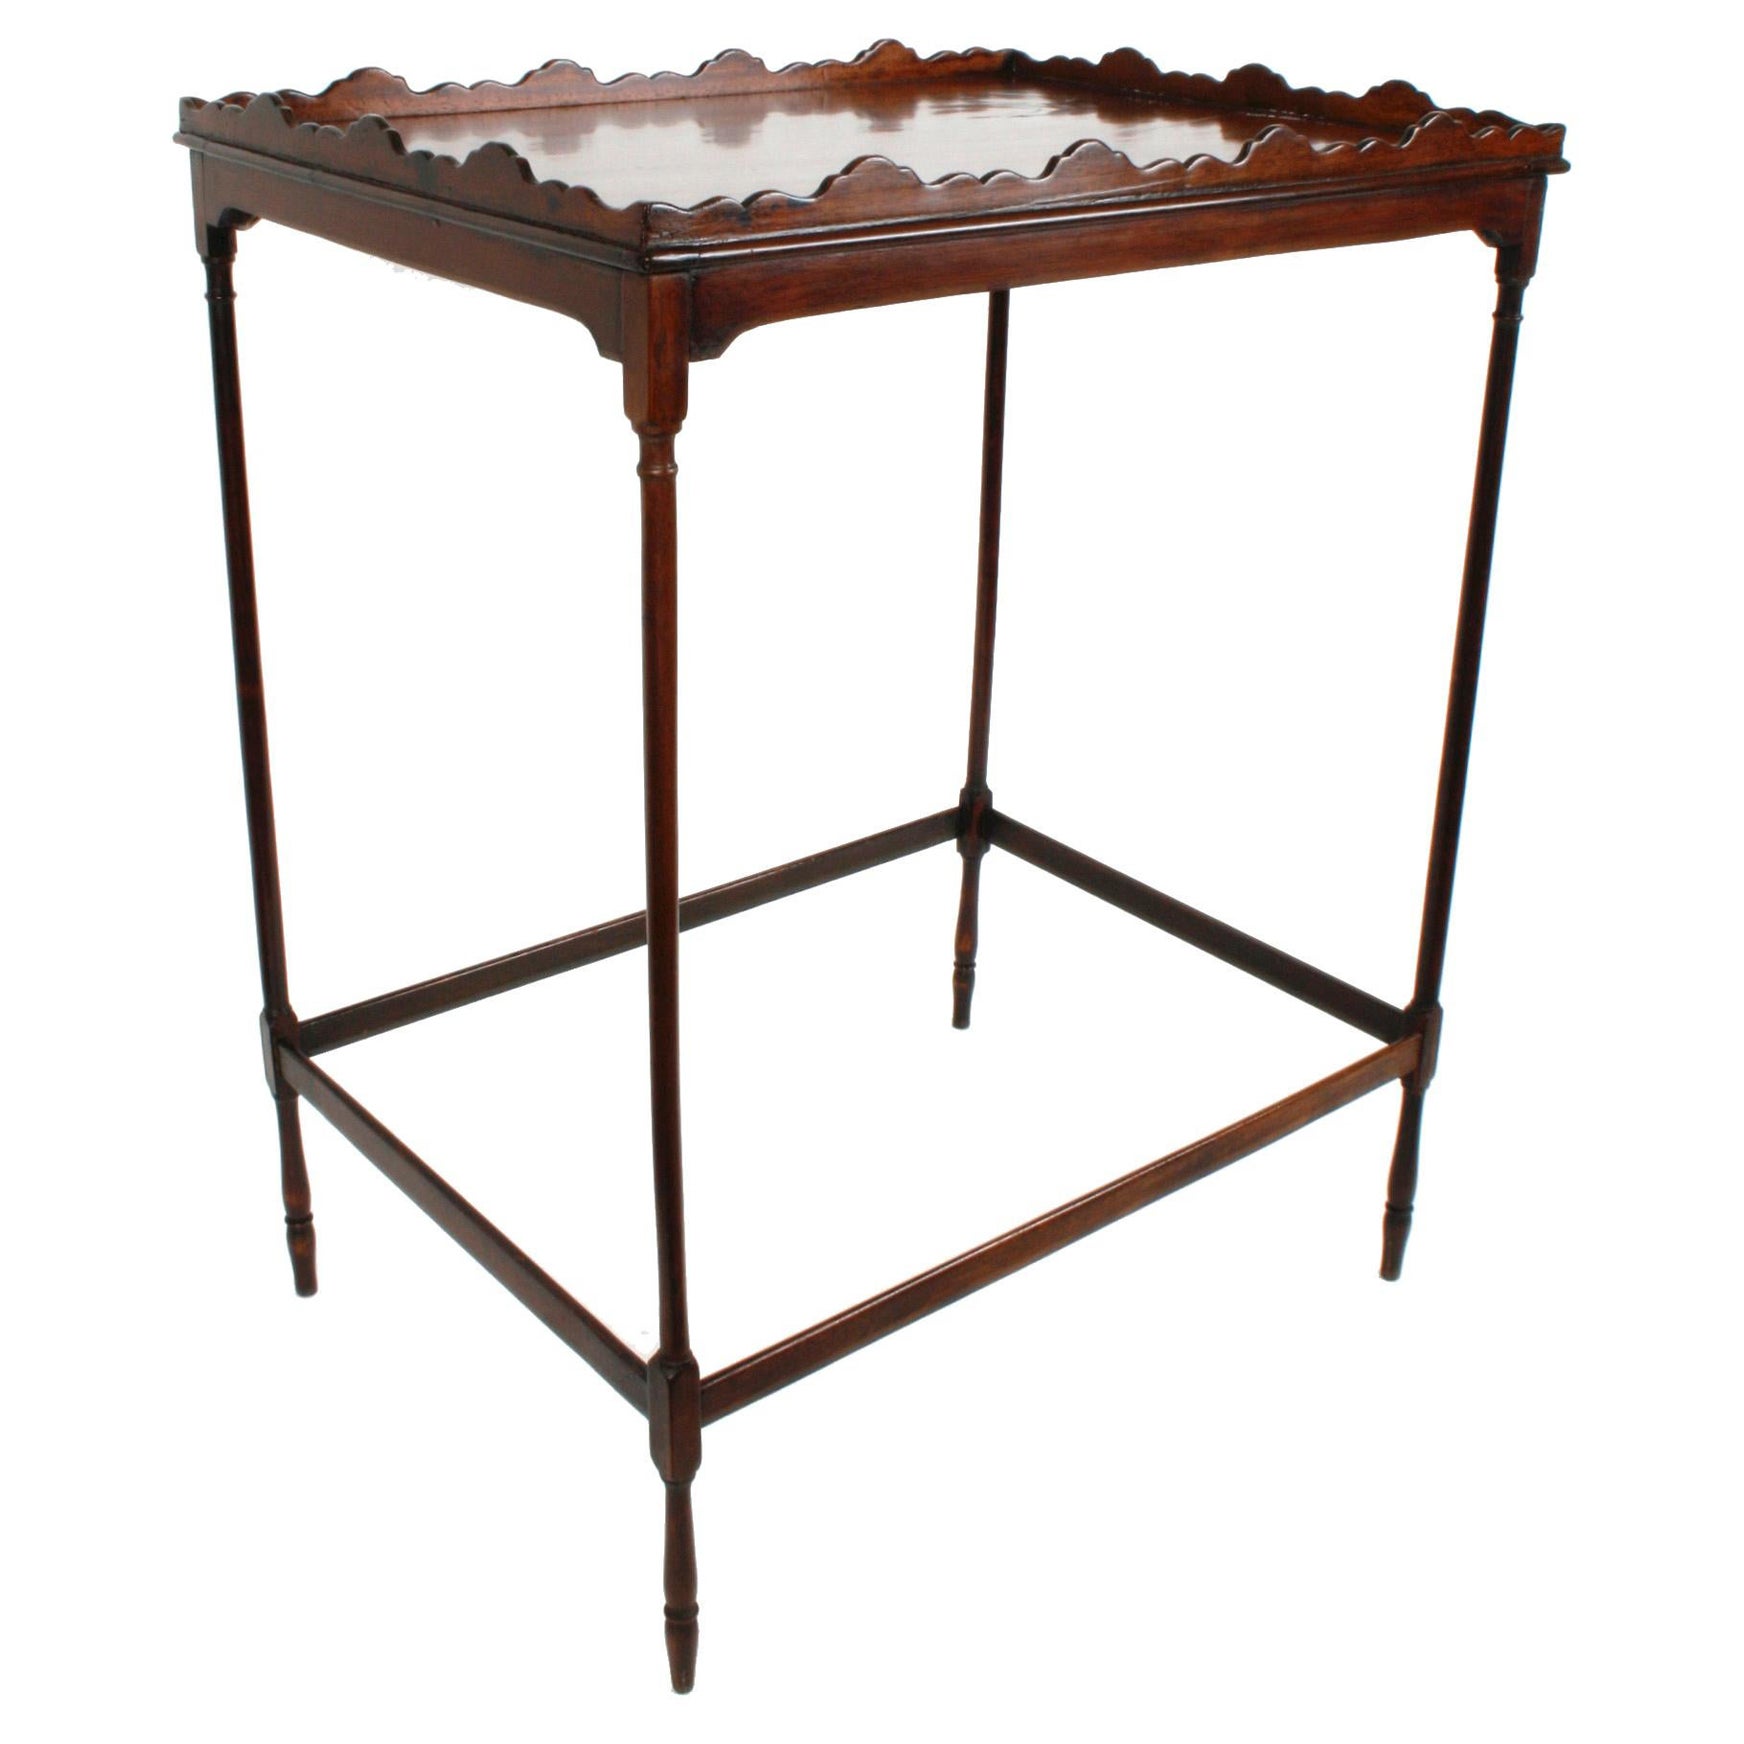 George III Spider Leg Mahogany Silver/Tea Table with Scalloped Gallery, c1780 For Sale